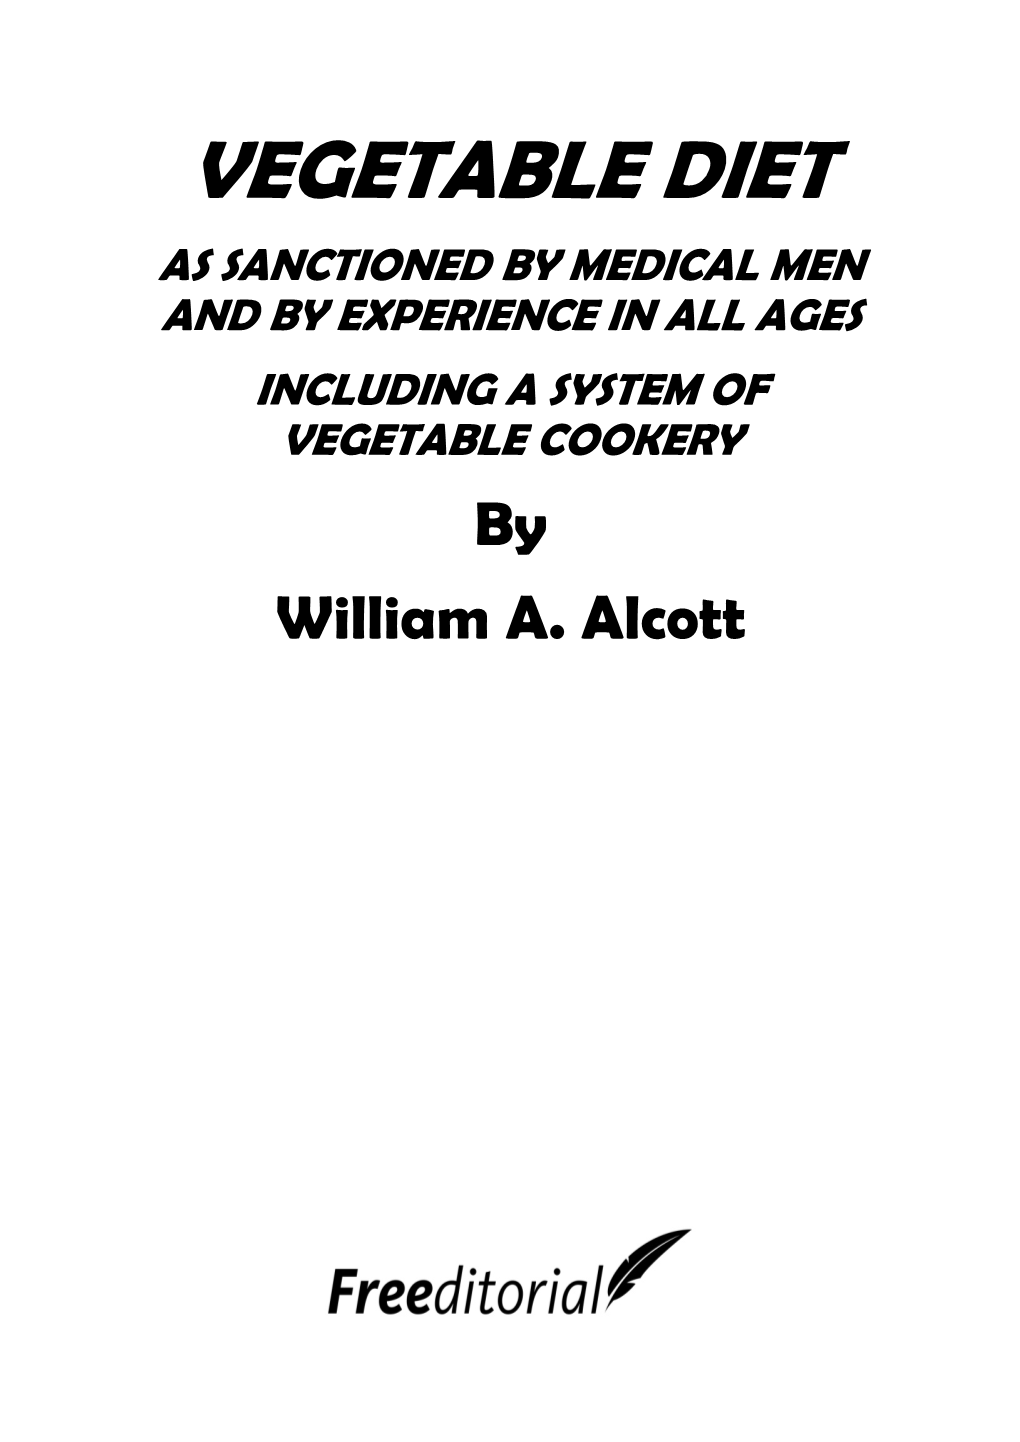 VEGETABLE DIET AS SANCTIONED by MEDICAL MEN and by EXPERIENCE in ALL AGES INCLUDING a SYSTEM of VEGETABLE COOKERY by William A